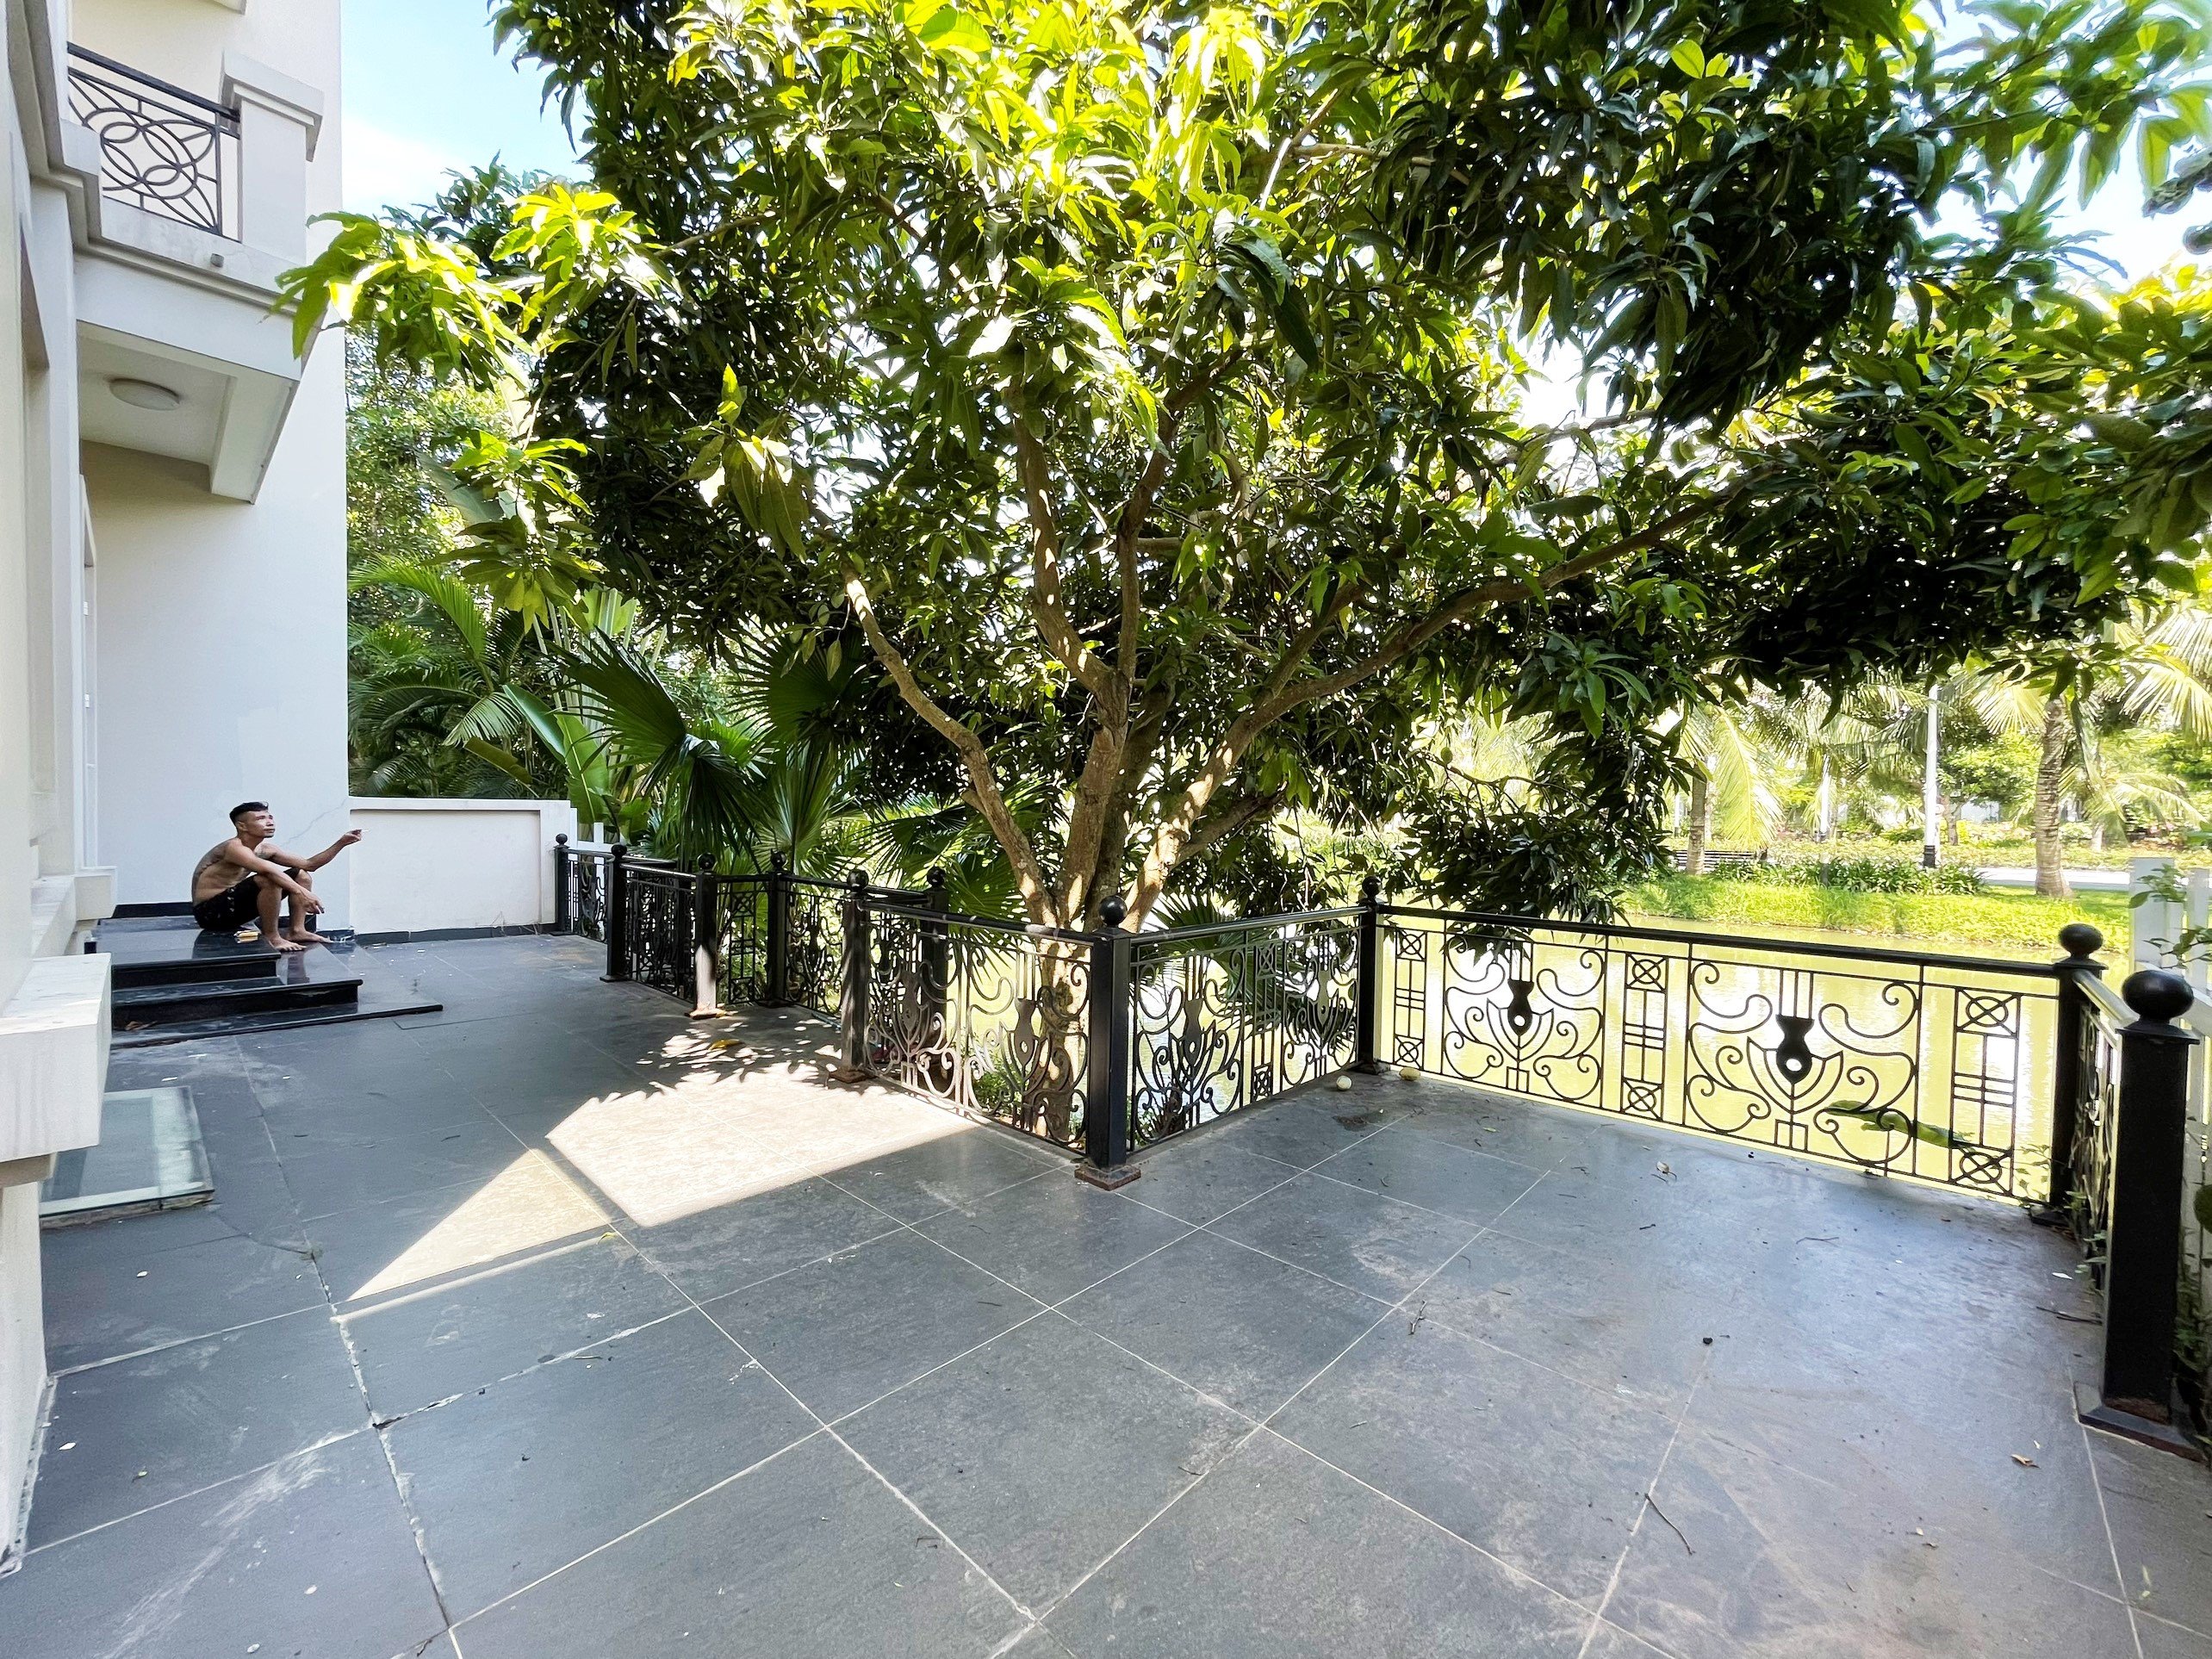 Villa for rent 225 sqm with big yar next to the river, amazing view in Hoa Sua Vinhomes Riverside